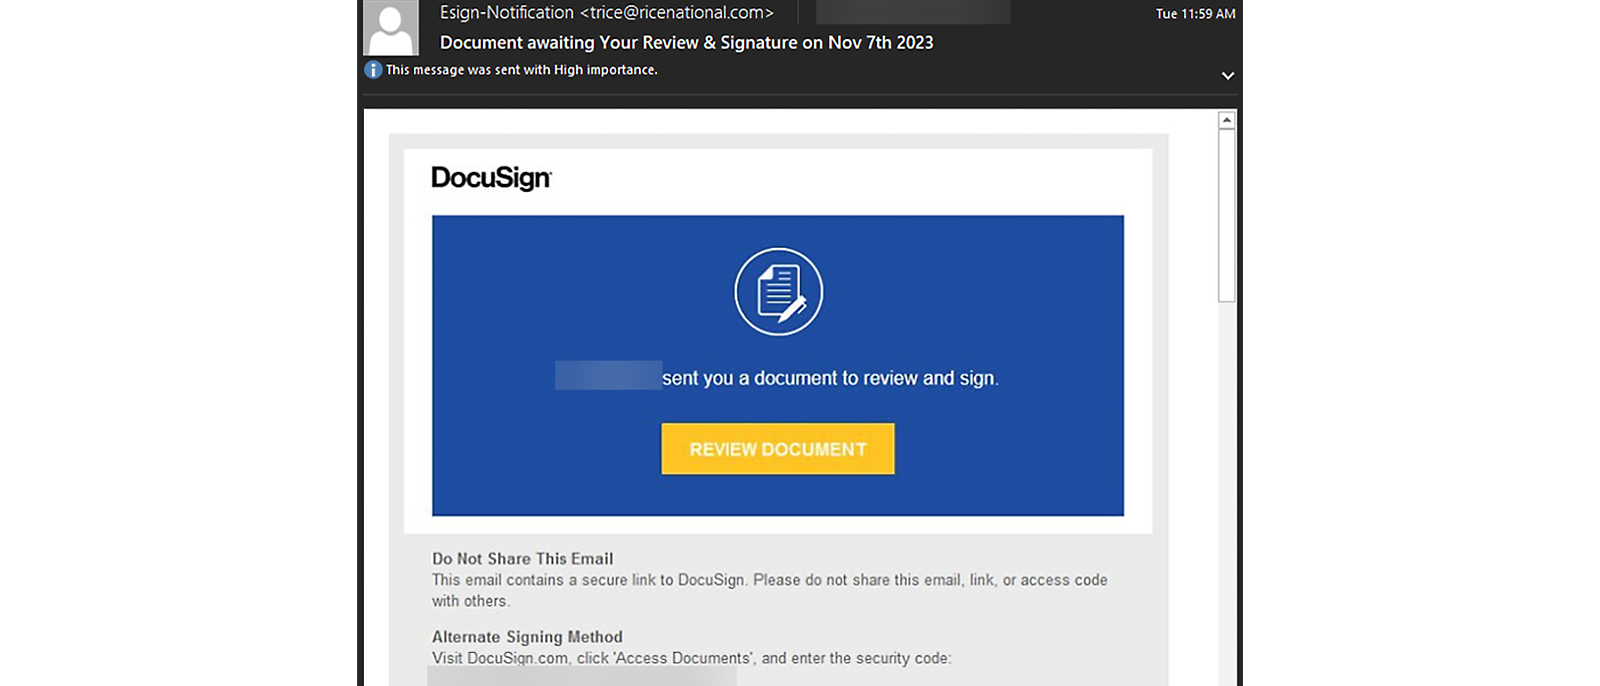 Esign-Notification: Document for review and signature from DocuSign. Important message.